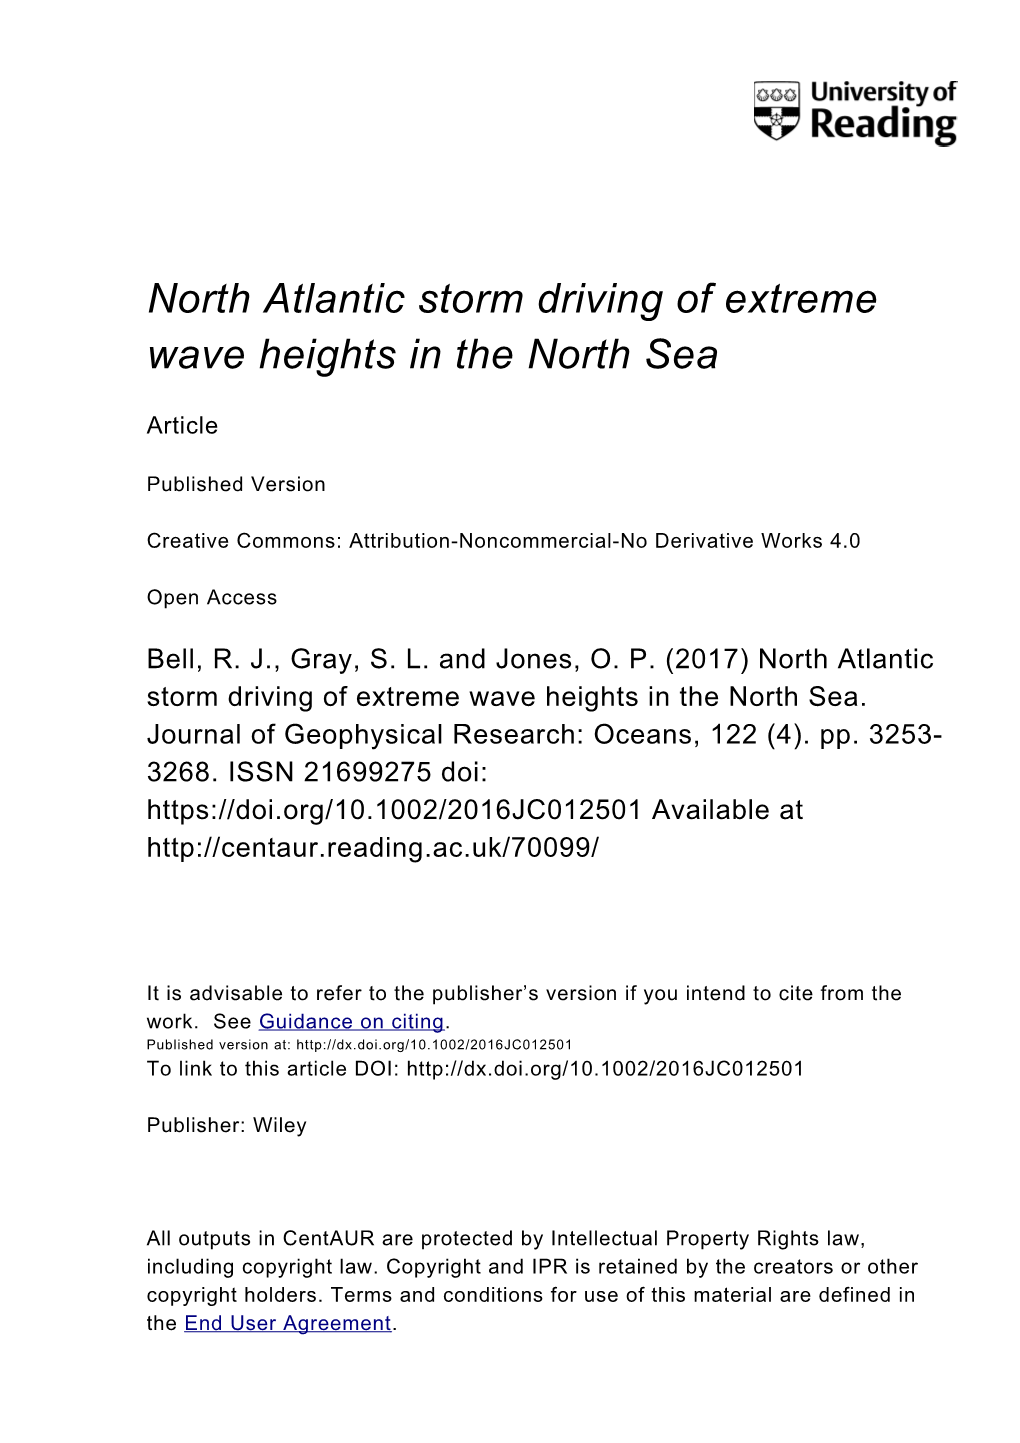 North Atlantic Storm Driving of Extreme Wave Heights in the North Sea